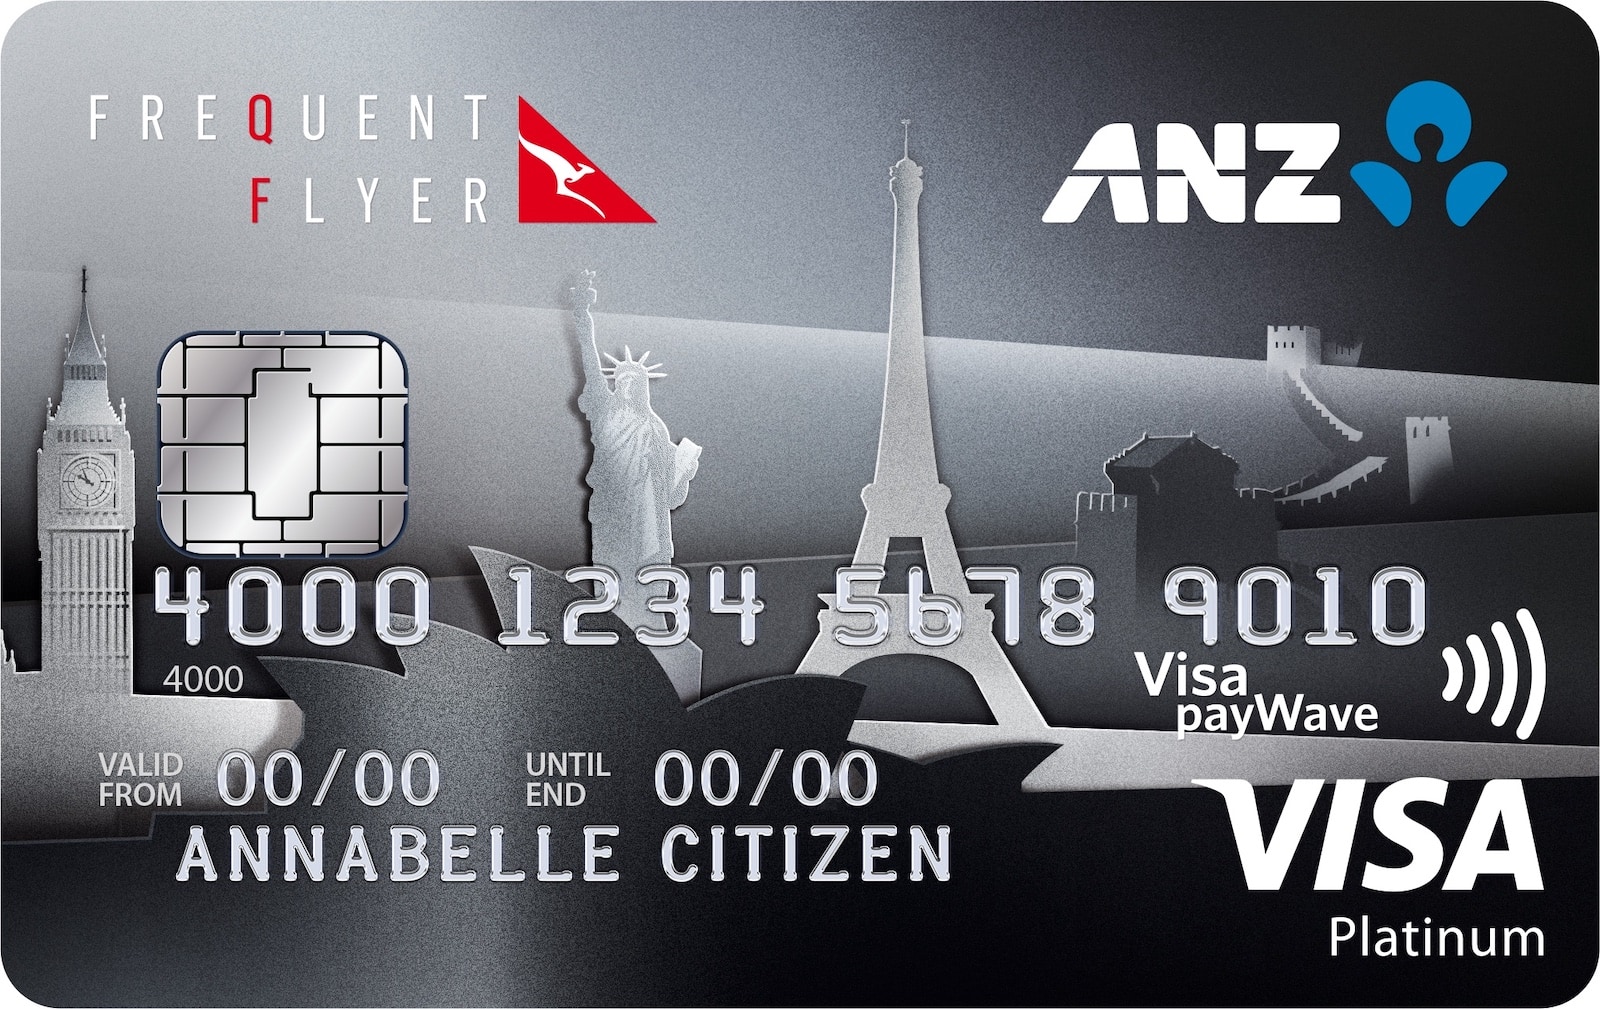 Learn How to Apply for an ANZ Airpoints Credit Card - Visa Platinum